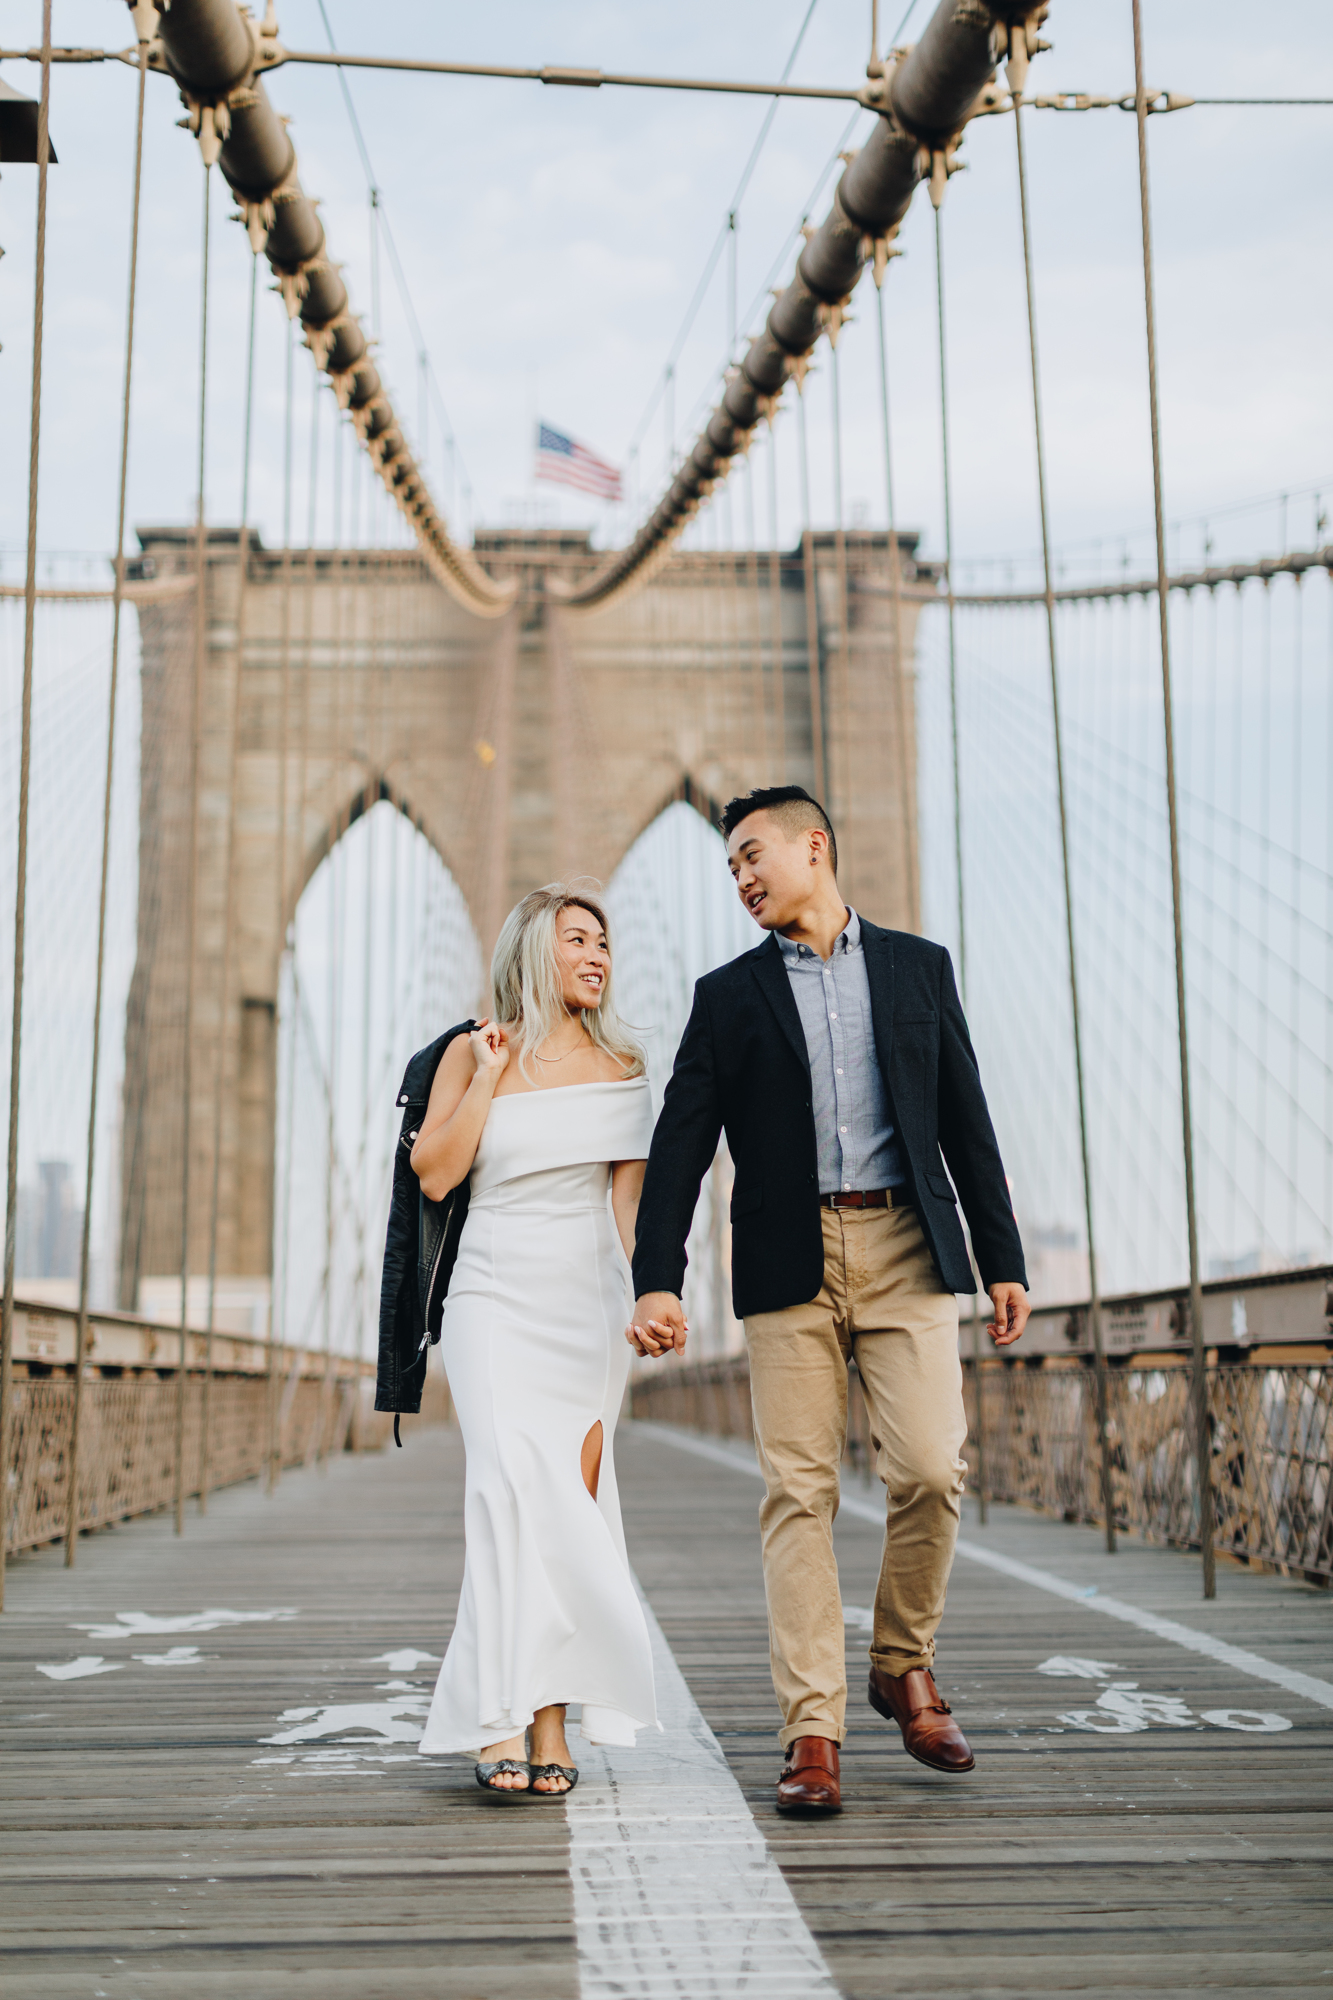 Picturesque Fall Engagement Photos in DUMBO